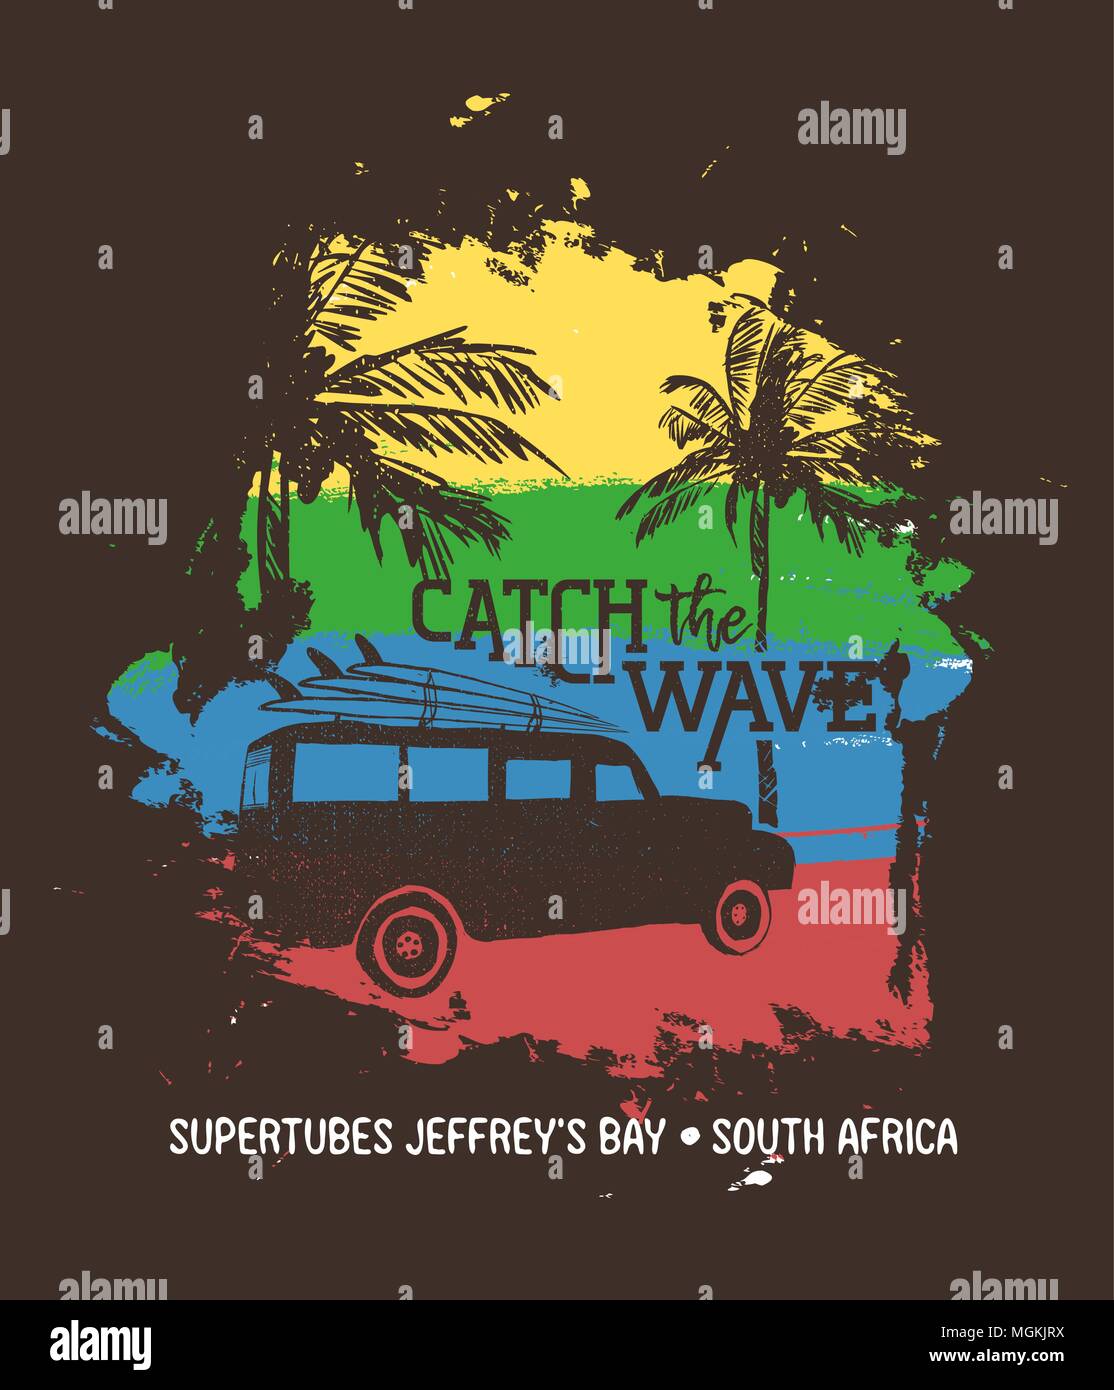 Summer vacation in supertubes jeffreys bay, south africa. Holiday illustration with text quote, car and surf boards on tropical beach. Vintage texture Stock Vector